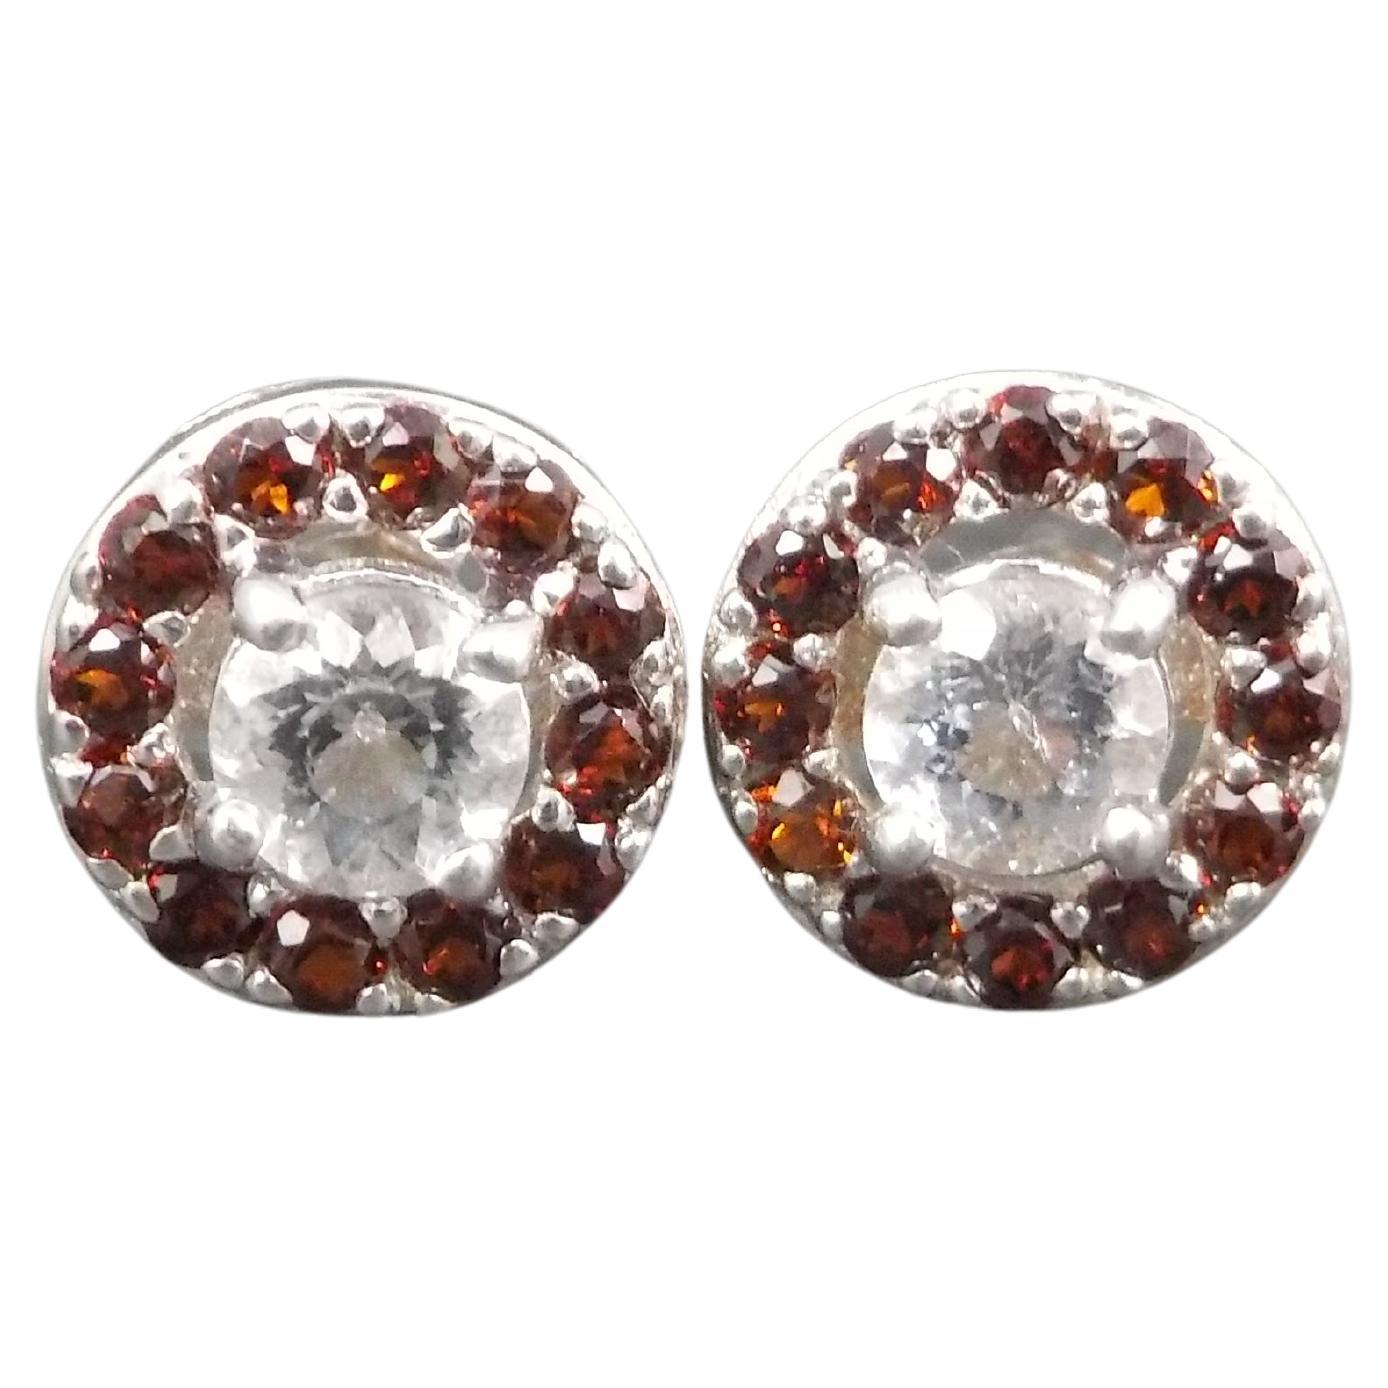 Quartz and Garnet Halo Stud Earrings Sterling Silver For Sale